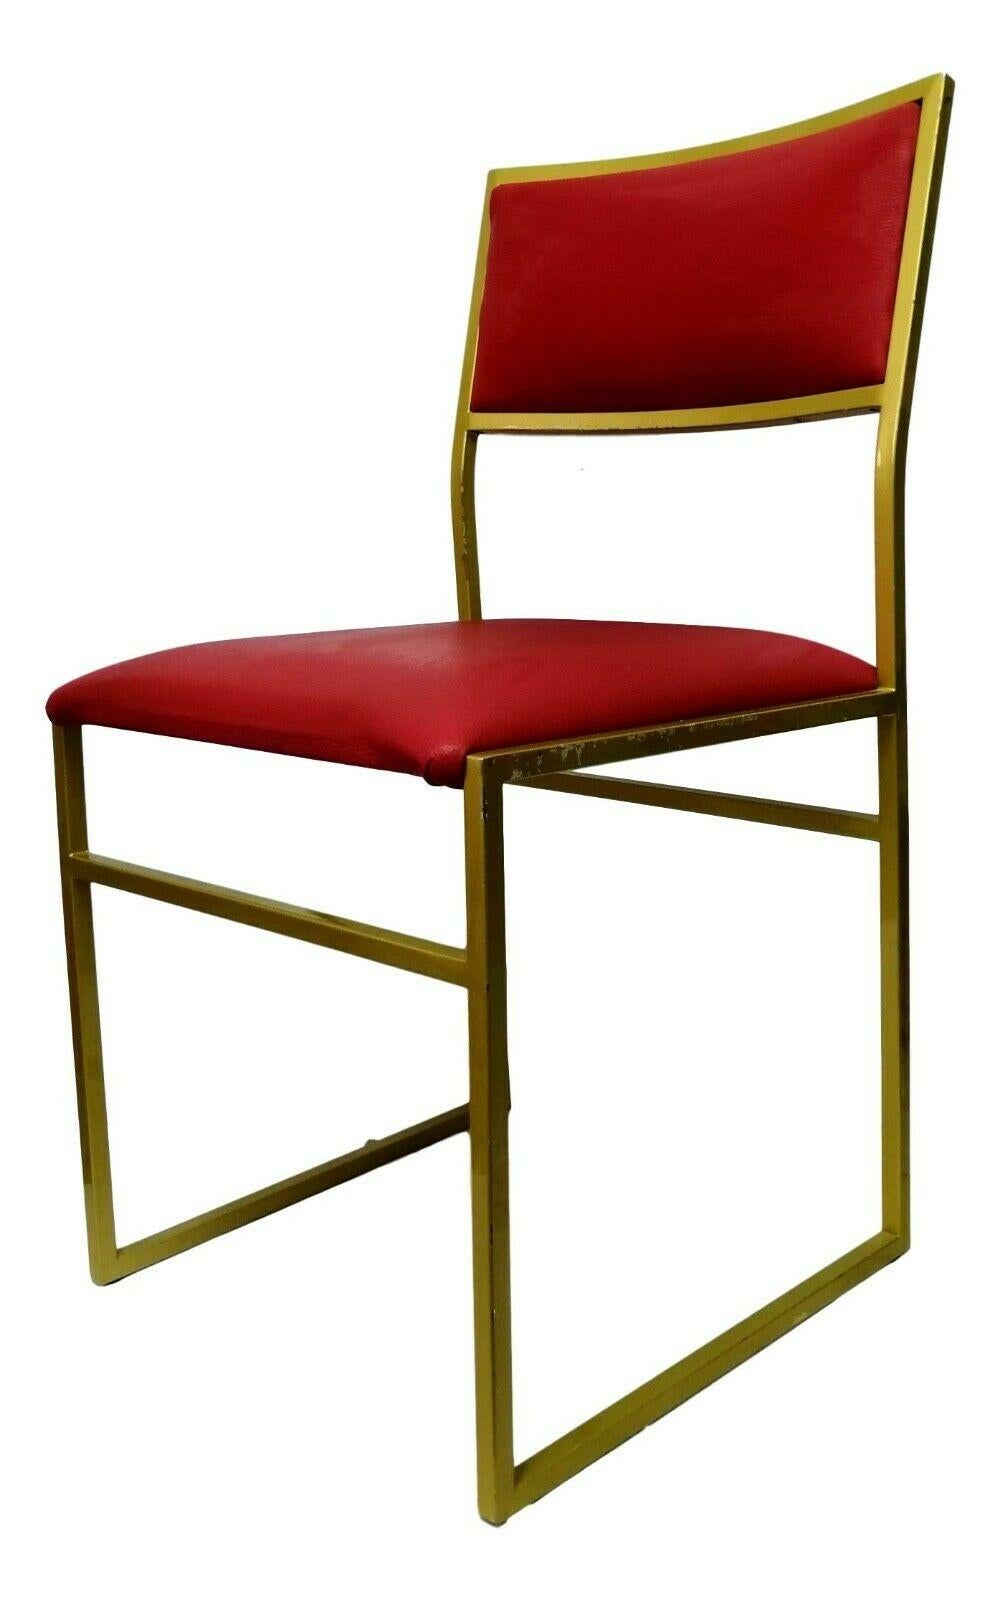 Collectible Chair in Gold Metal and Burgundy Upholstery, 1970s For Sale 2